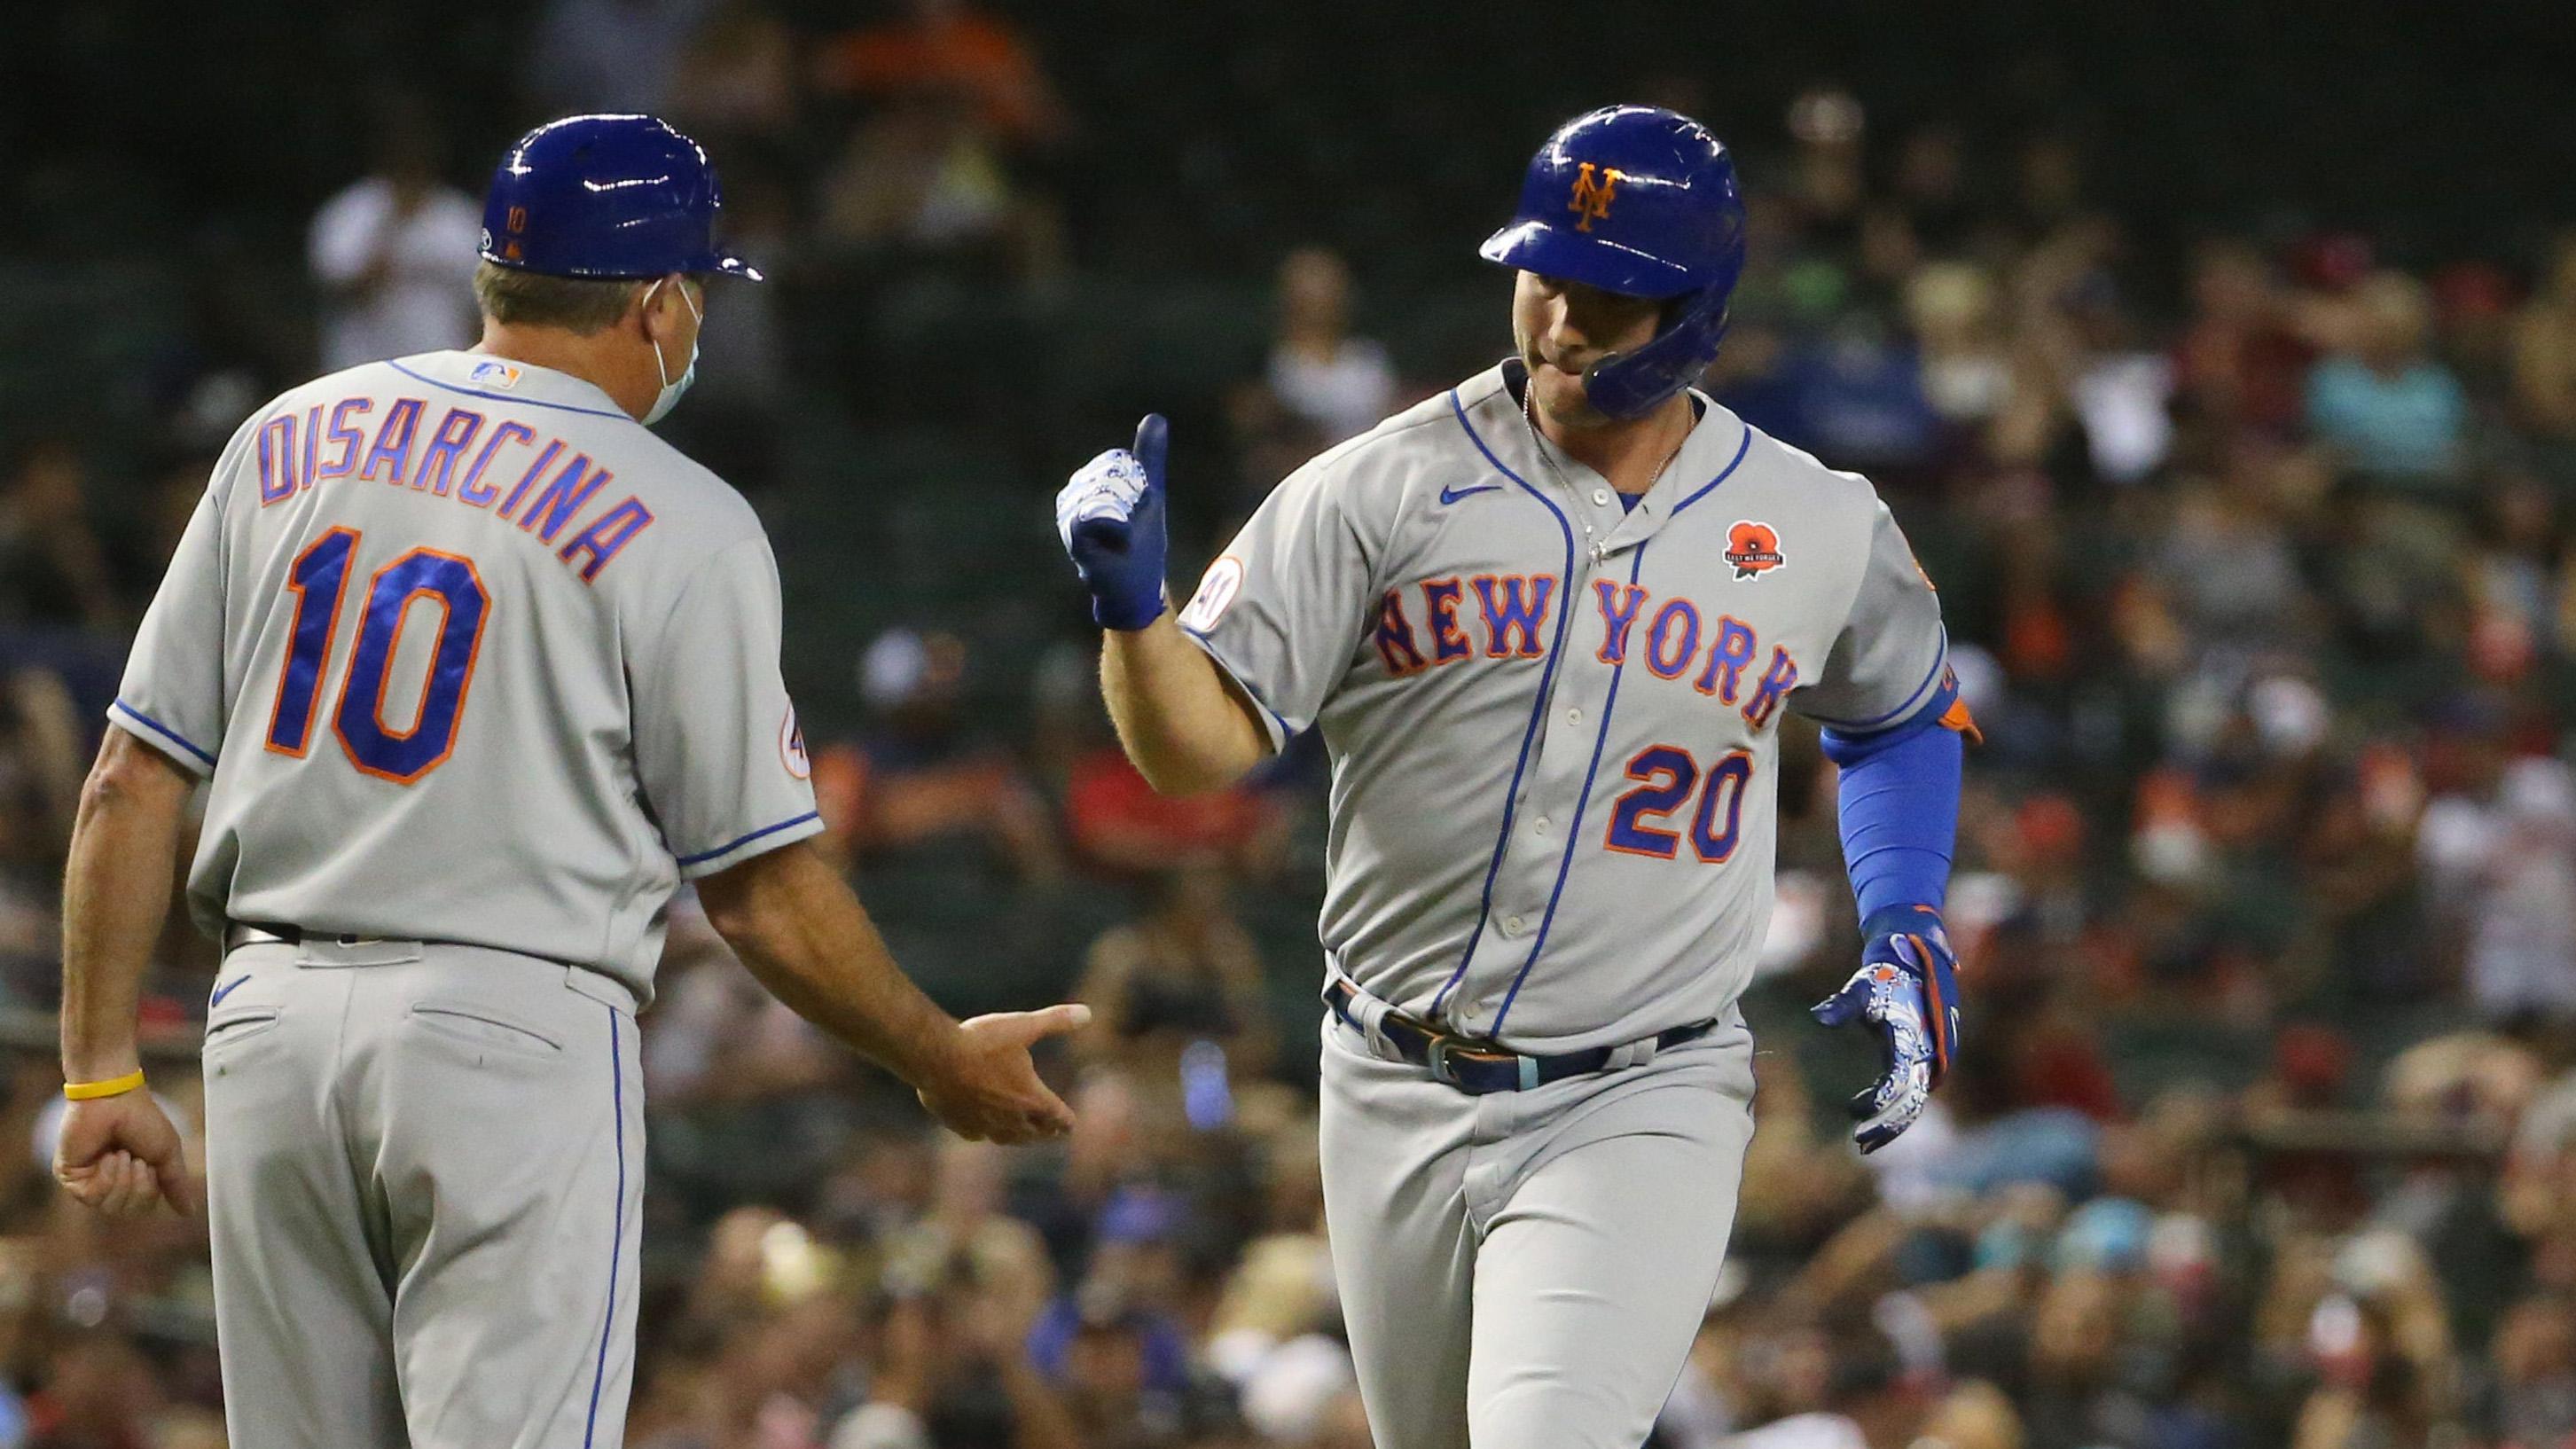 New York Mets' Pete Alonso (20) is congratulated by third base coach Gary Disarcina (10) after hitting a two-run home run against the Arizona Diamondbacks during the seventh inning at Chase Field May 31, 2021. Mets Vs Diamondbacks / Michael Chow/The Republic via Imagn Content Services, LLC